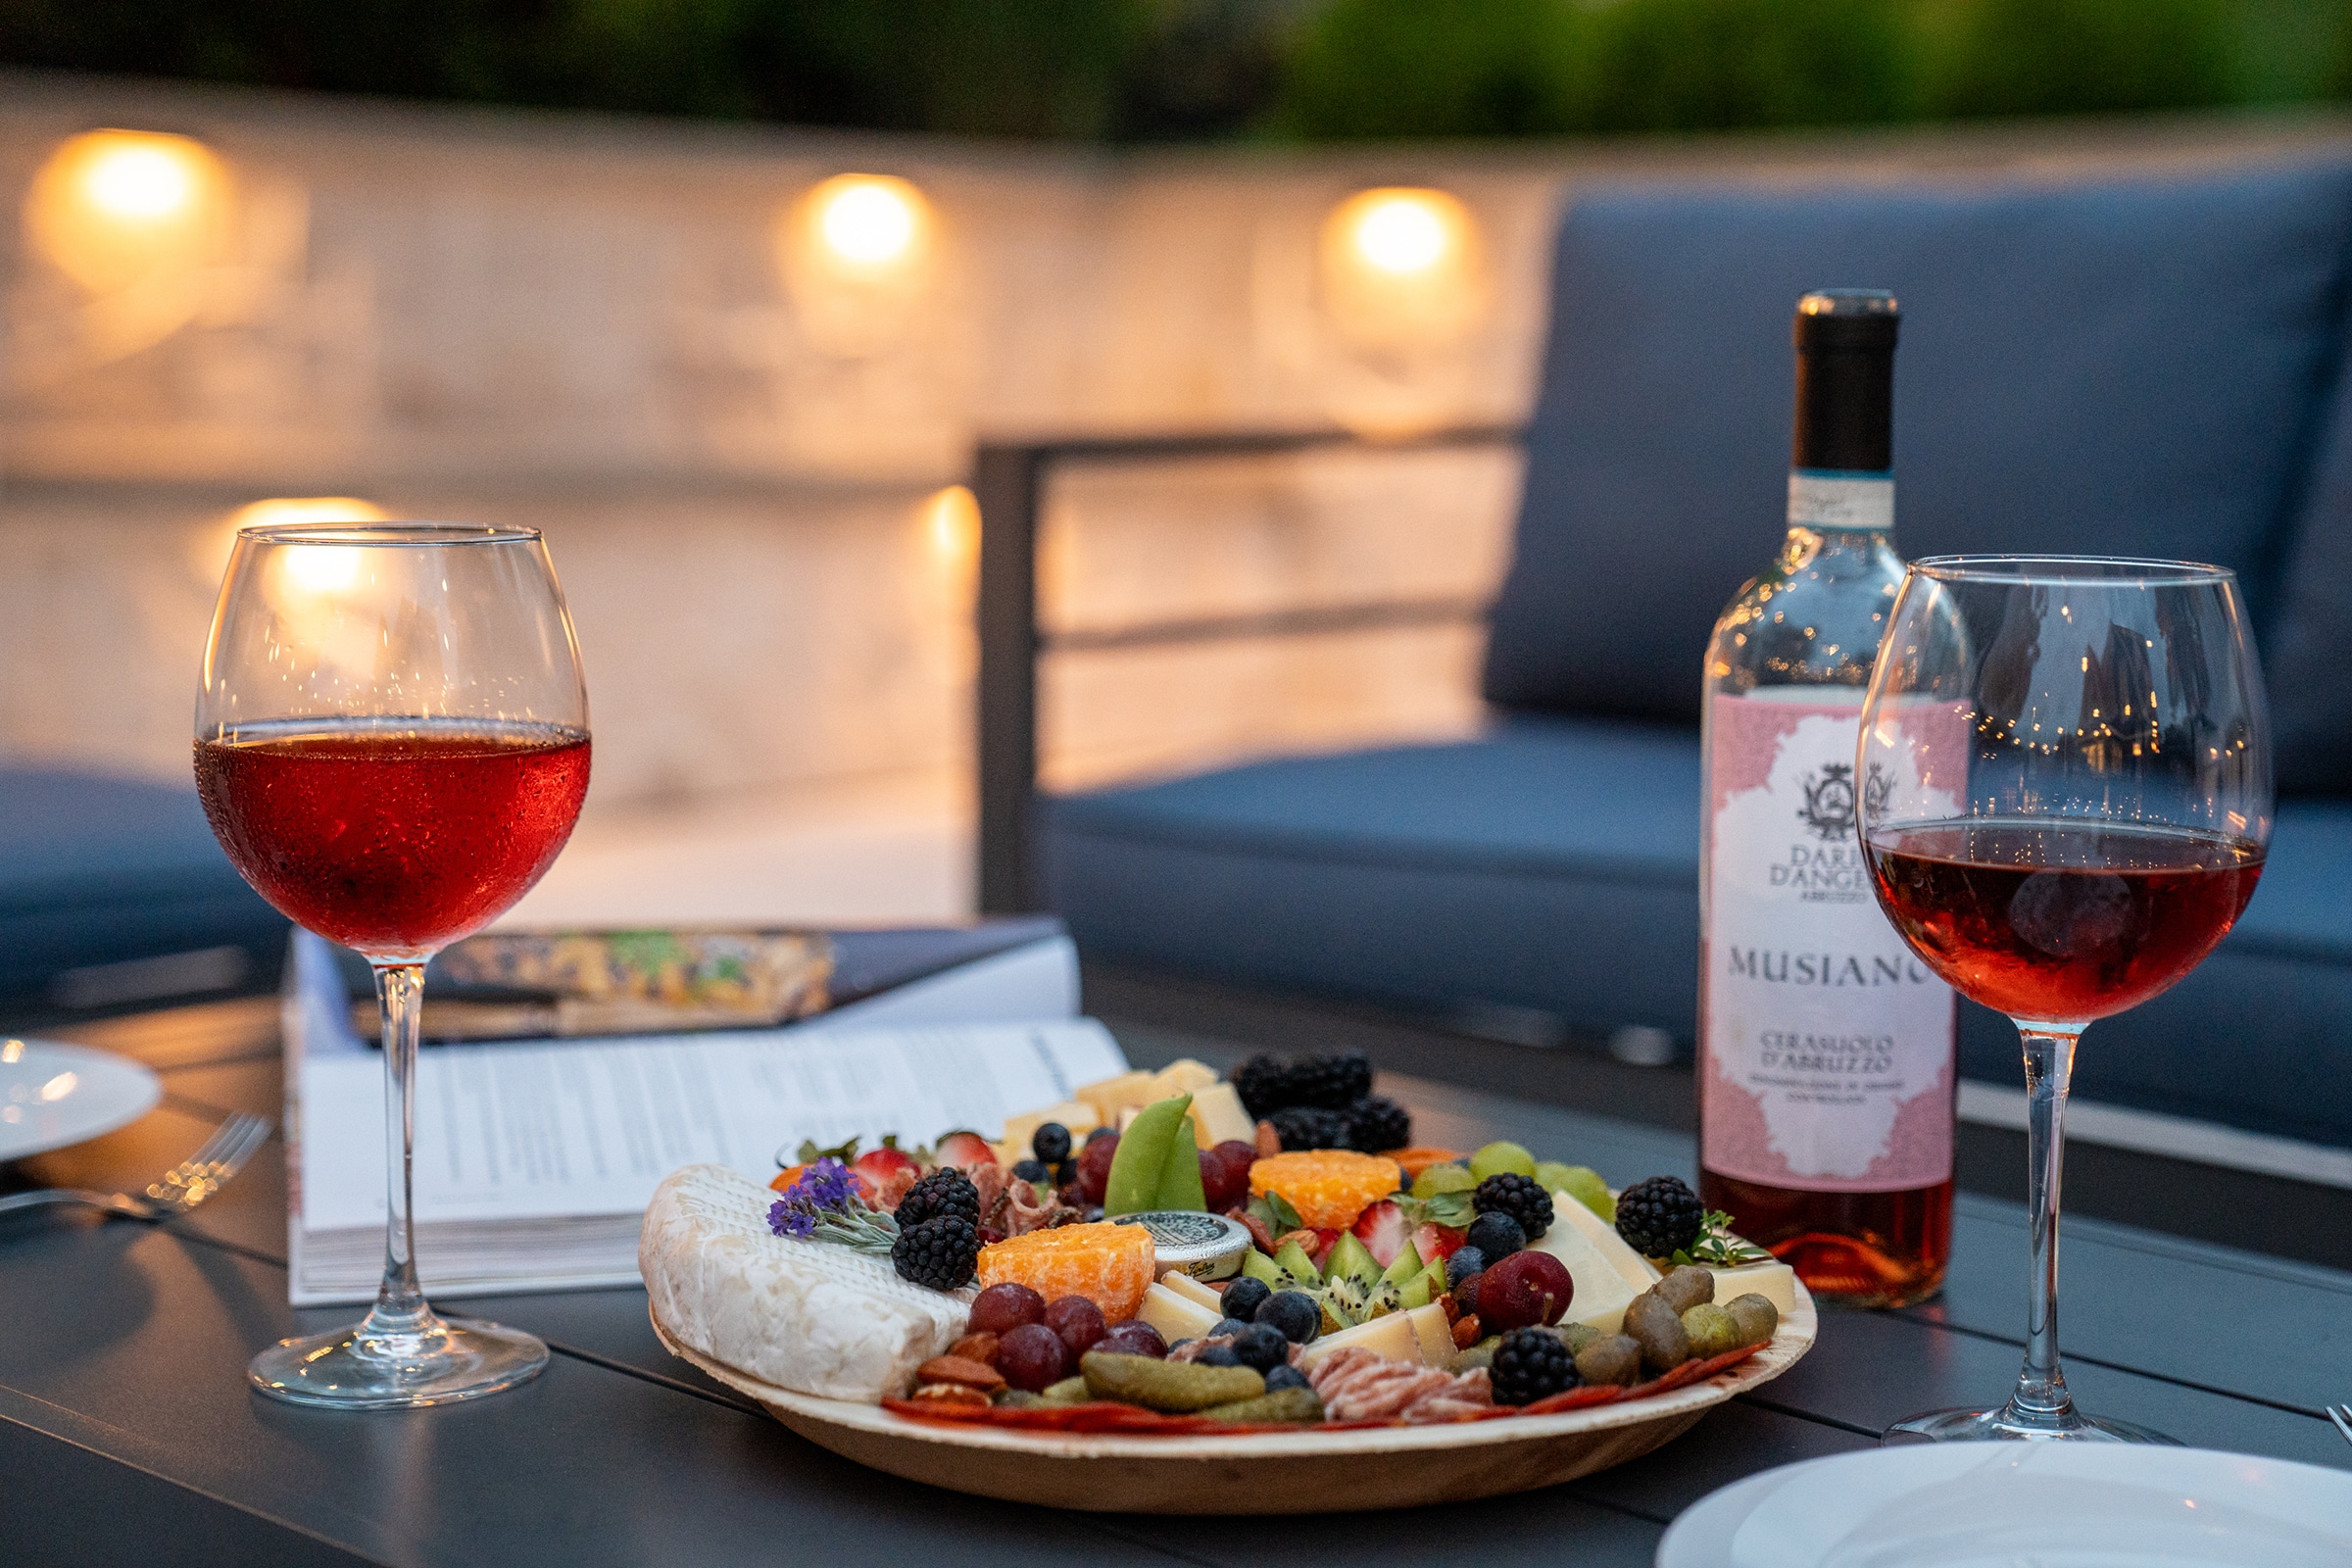 A charcuterie board and glasses of wine wait to be enjoyed by the patio fireplace.